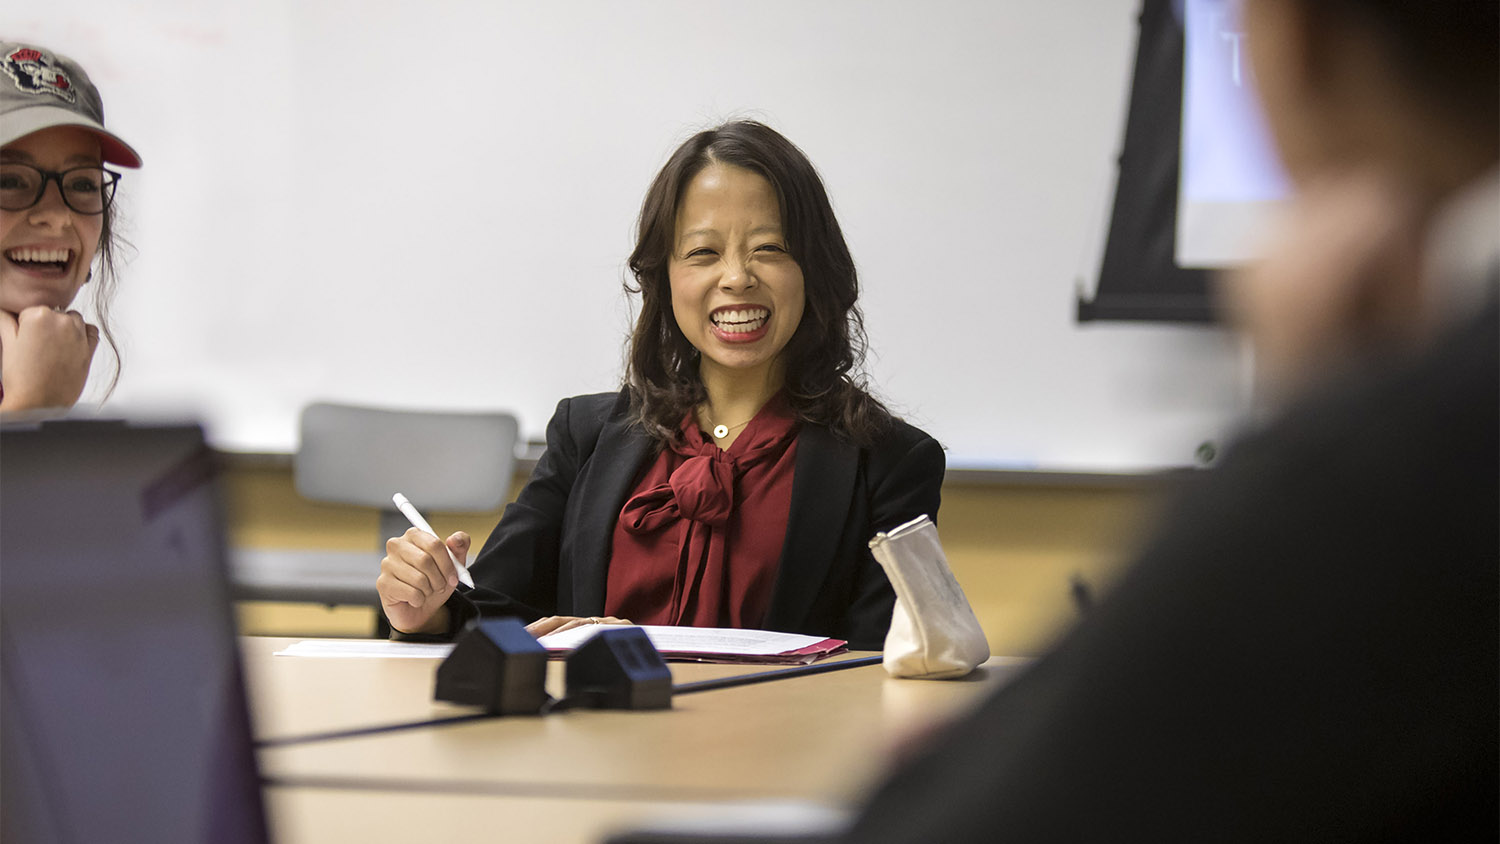 Dr. Crystal Chen Lee, professor smiling while teaching college of education students in classroom